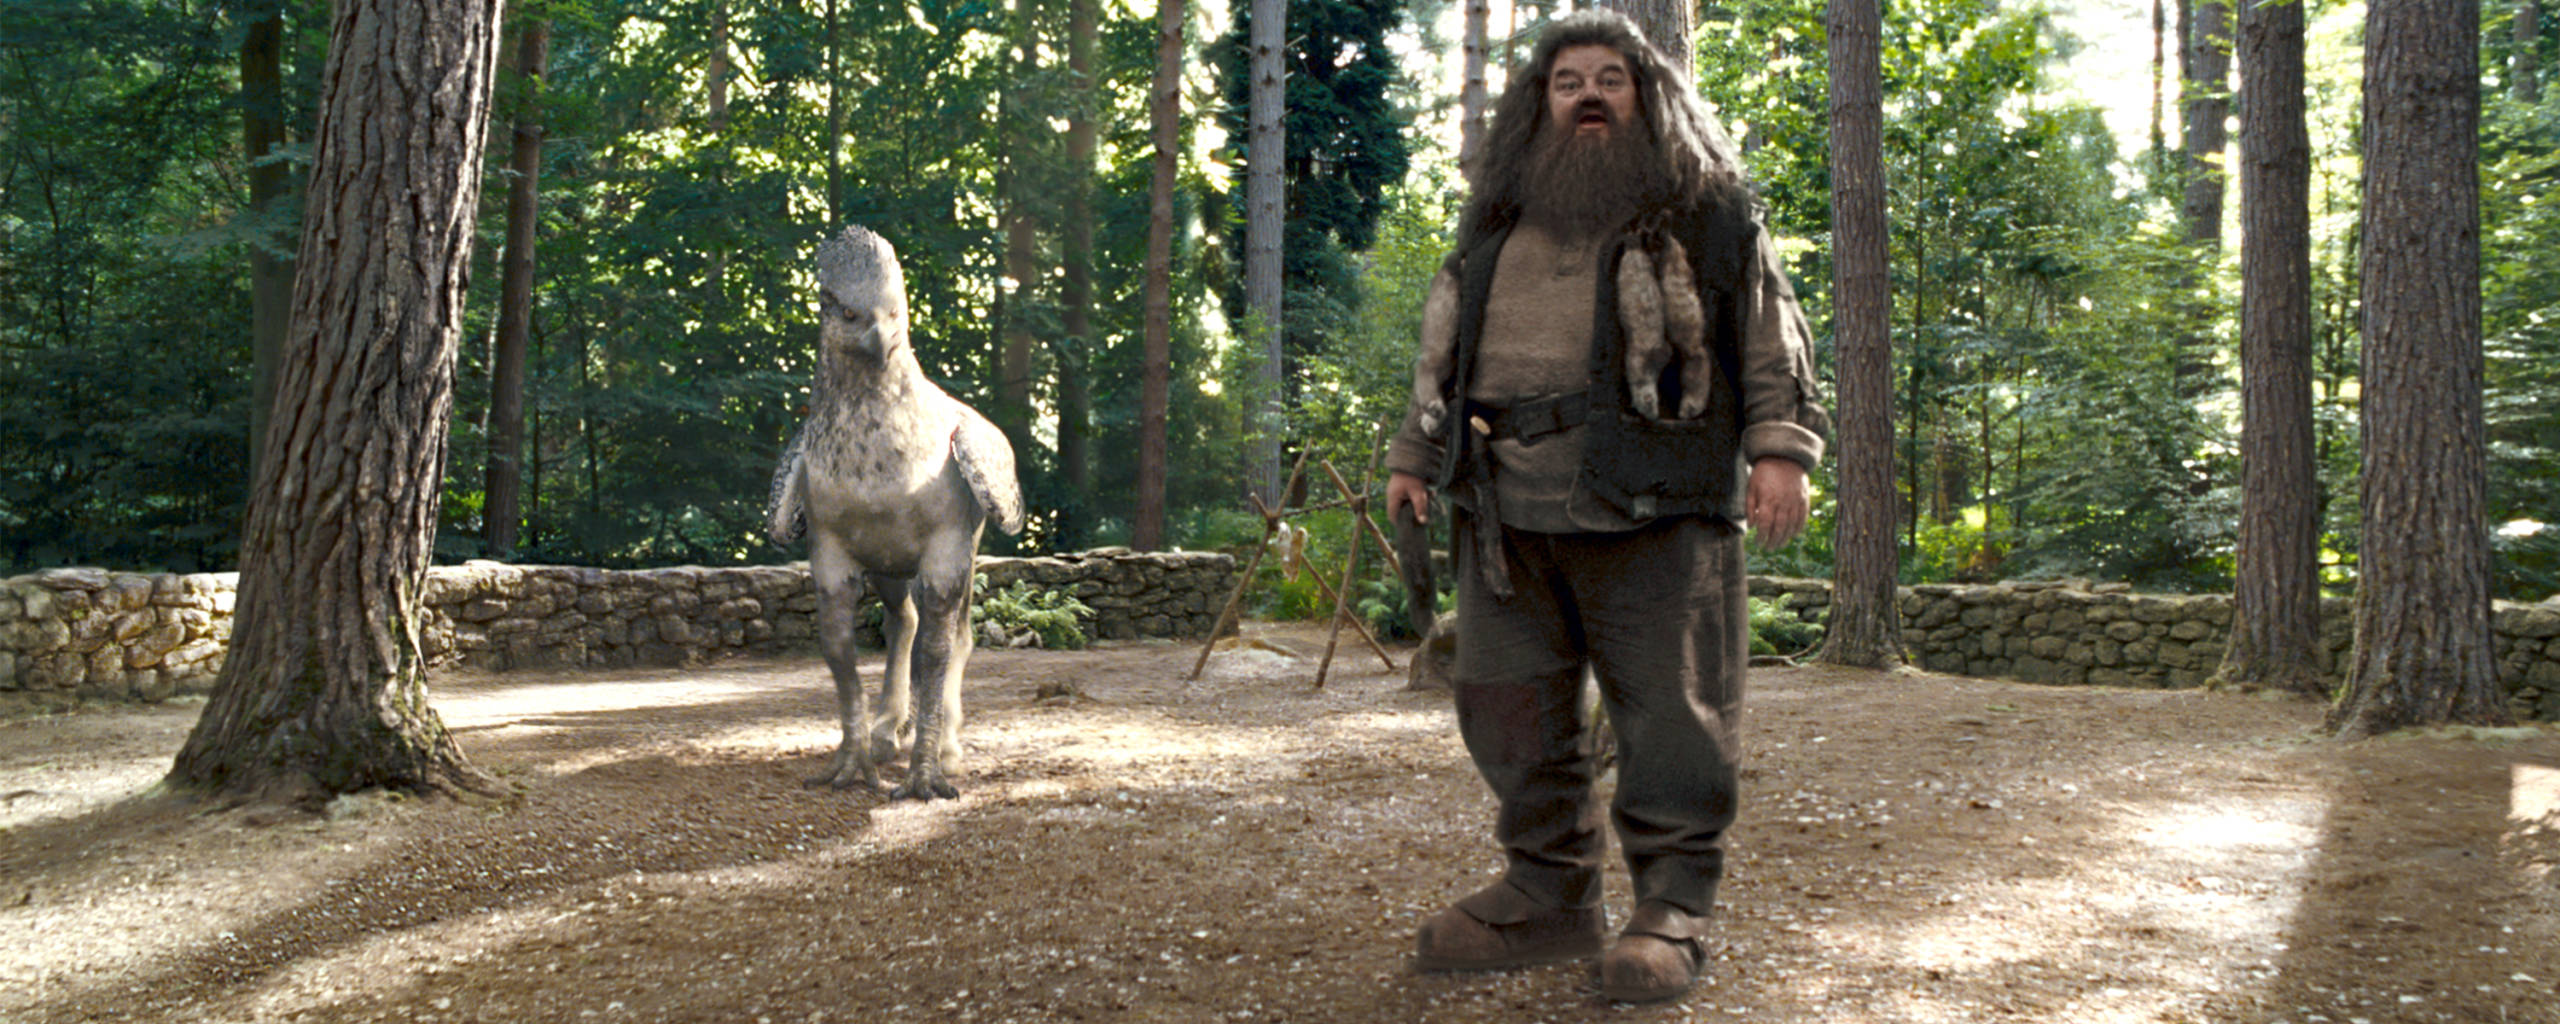 Hagrid and Buckbeak standing in a clearing during a Care of Magical Creatures lesson.